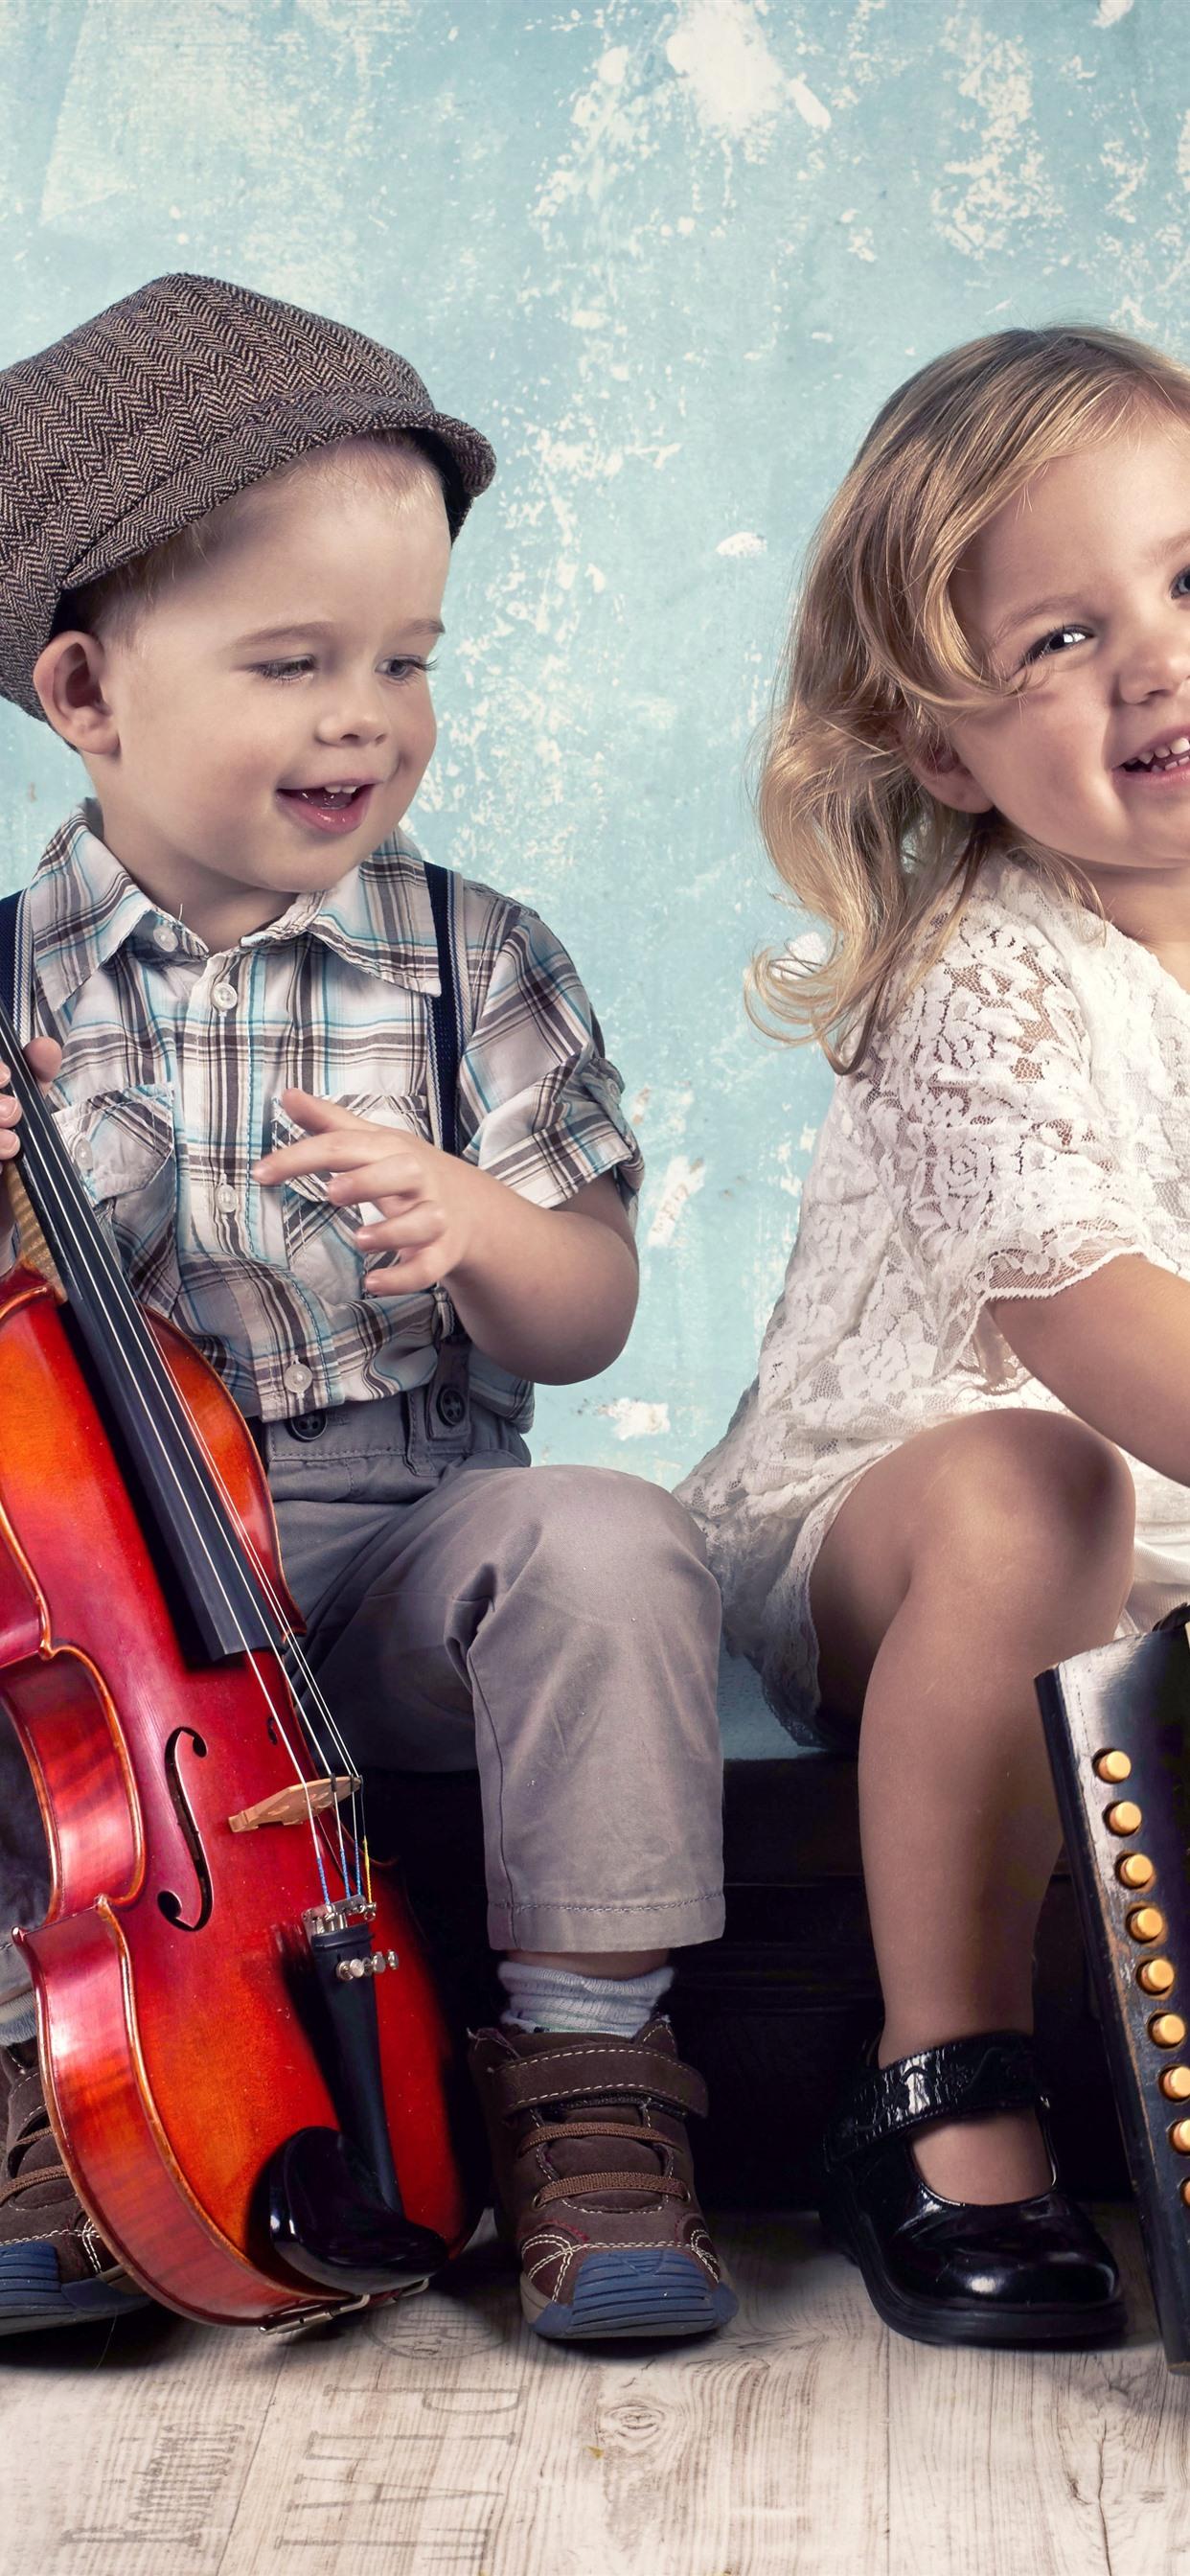 Wallpaper Cute little girl and boy, musical instruments, violin